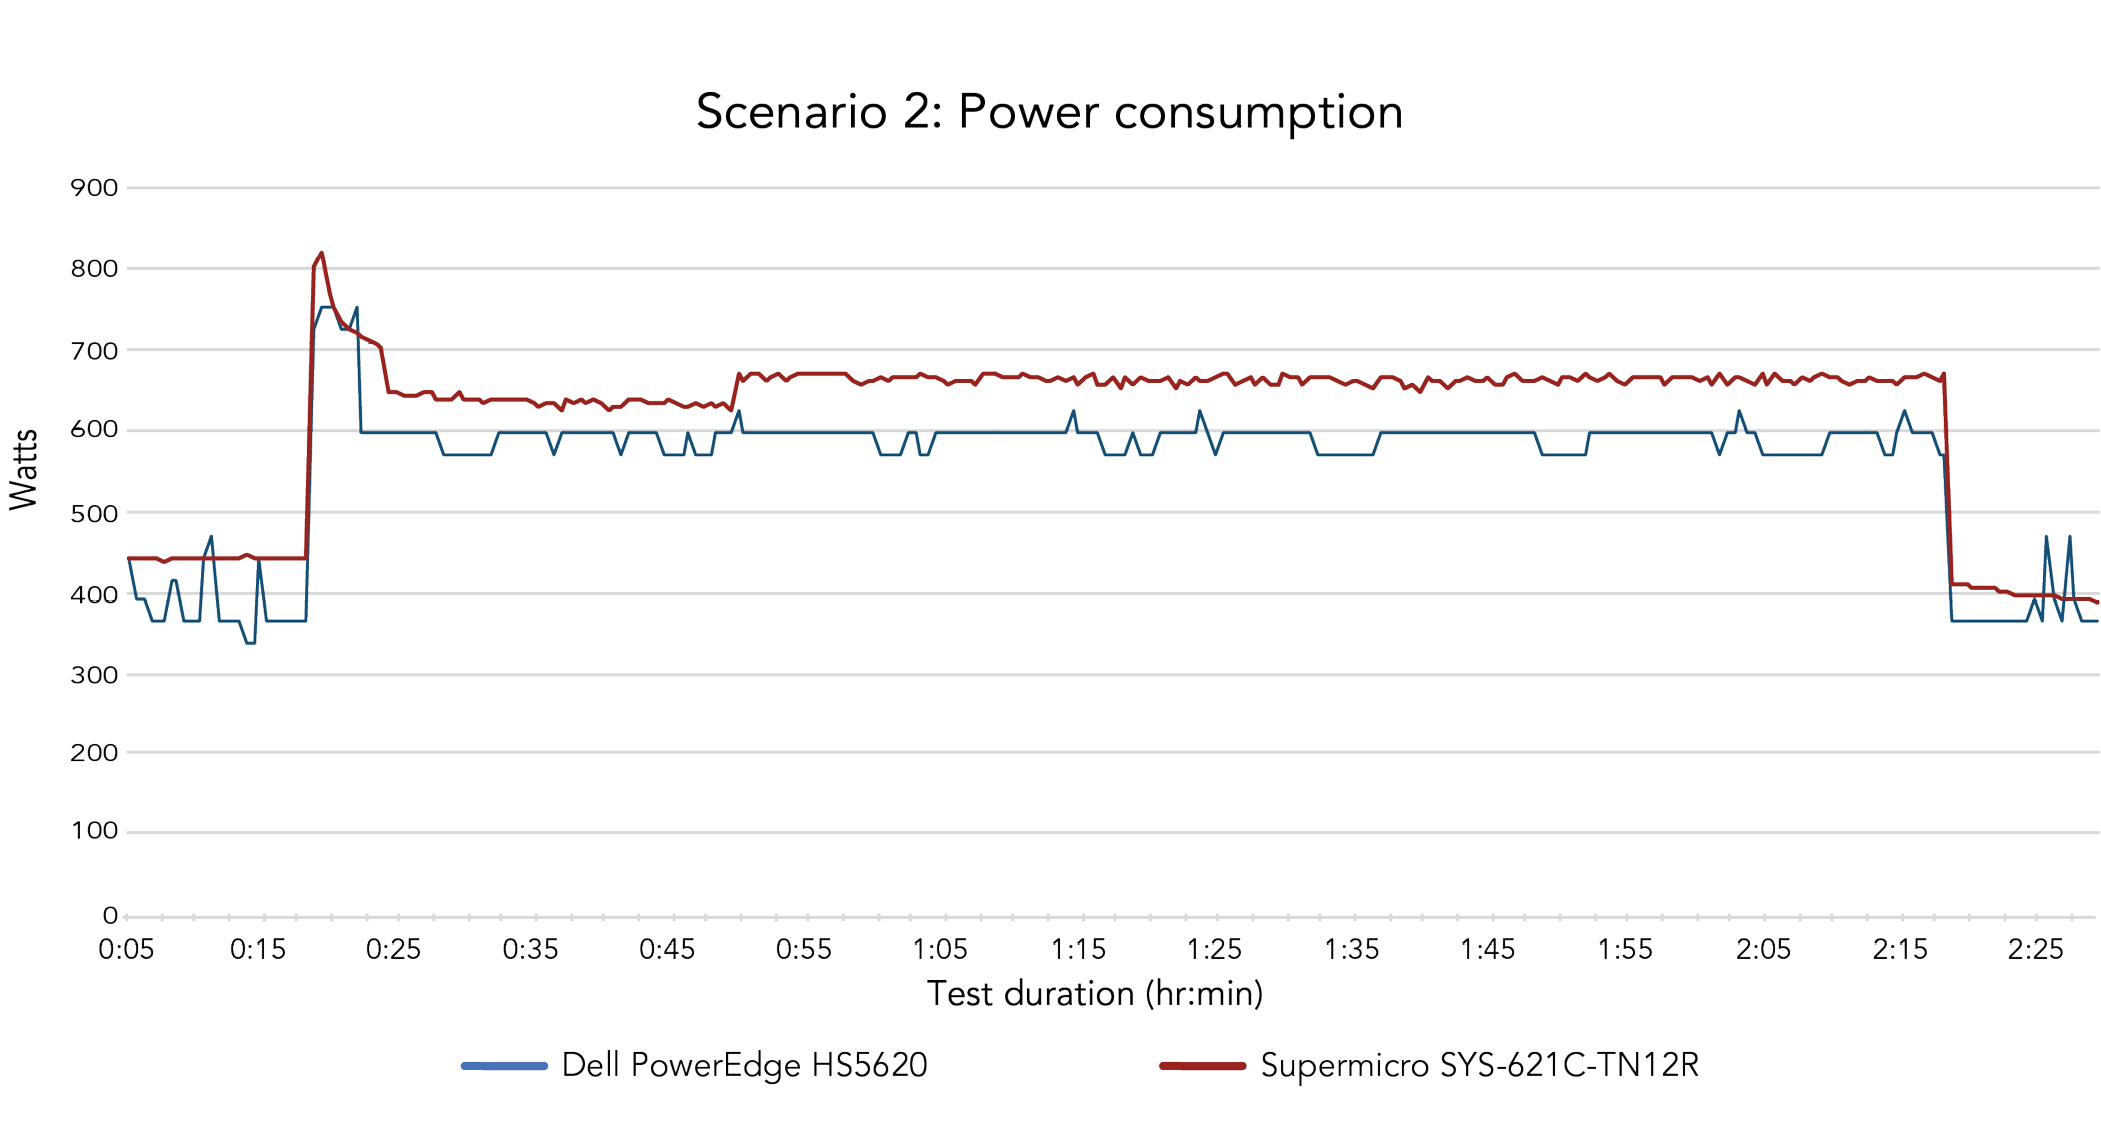 A line graph comparing each system’s power consumption over the course of the two-and-a-half-hour scenario 2 test, which includes an idle period 15 minutes before the workload began, the two-hour workload, and 15 minutes after the workload completed. The Dell PowerEdge HS5620 fluctuated between about 350 and 470 watts before the workload, rose to around 750 watts at the start of the workload, and remained around the 600-watt mark for the majority of the two-hour workload. Its power consumption dropped to around 375 watts when the workload ended, with a couple of short spikes to about 475 watts. The Supermicro SYS‑621C-TN12R server’s power consumption remained steady at around 450 watts before the test, then rose to just over 800 watts at the start of the workload. Its power consumption dropped to around 650 to 675 watts within 20 minutes of the initial spike, and it stayed in that range for the majority of the test. When the workload ended, its power consumption dropped to just under 400 watts.